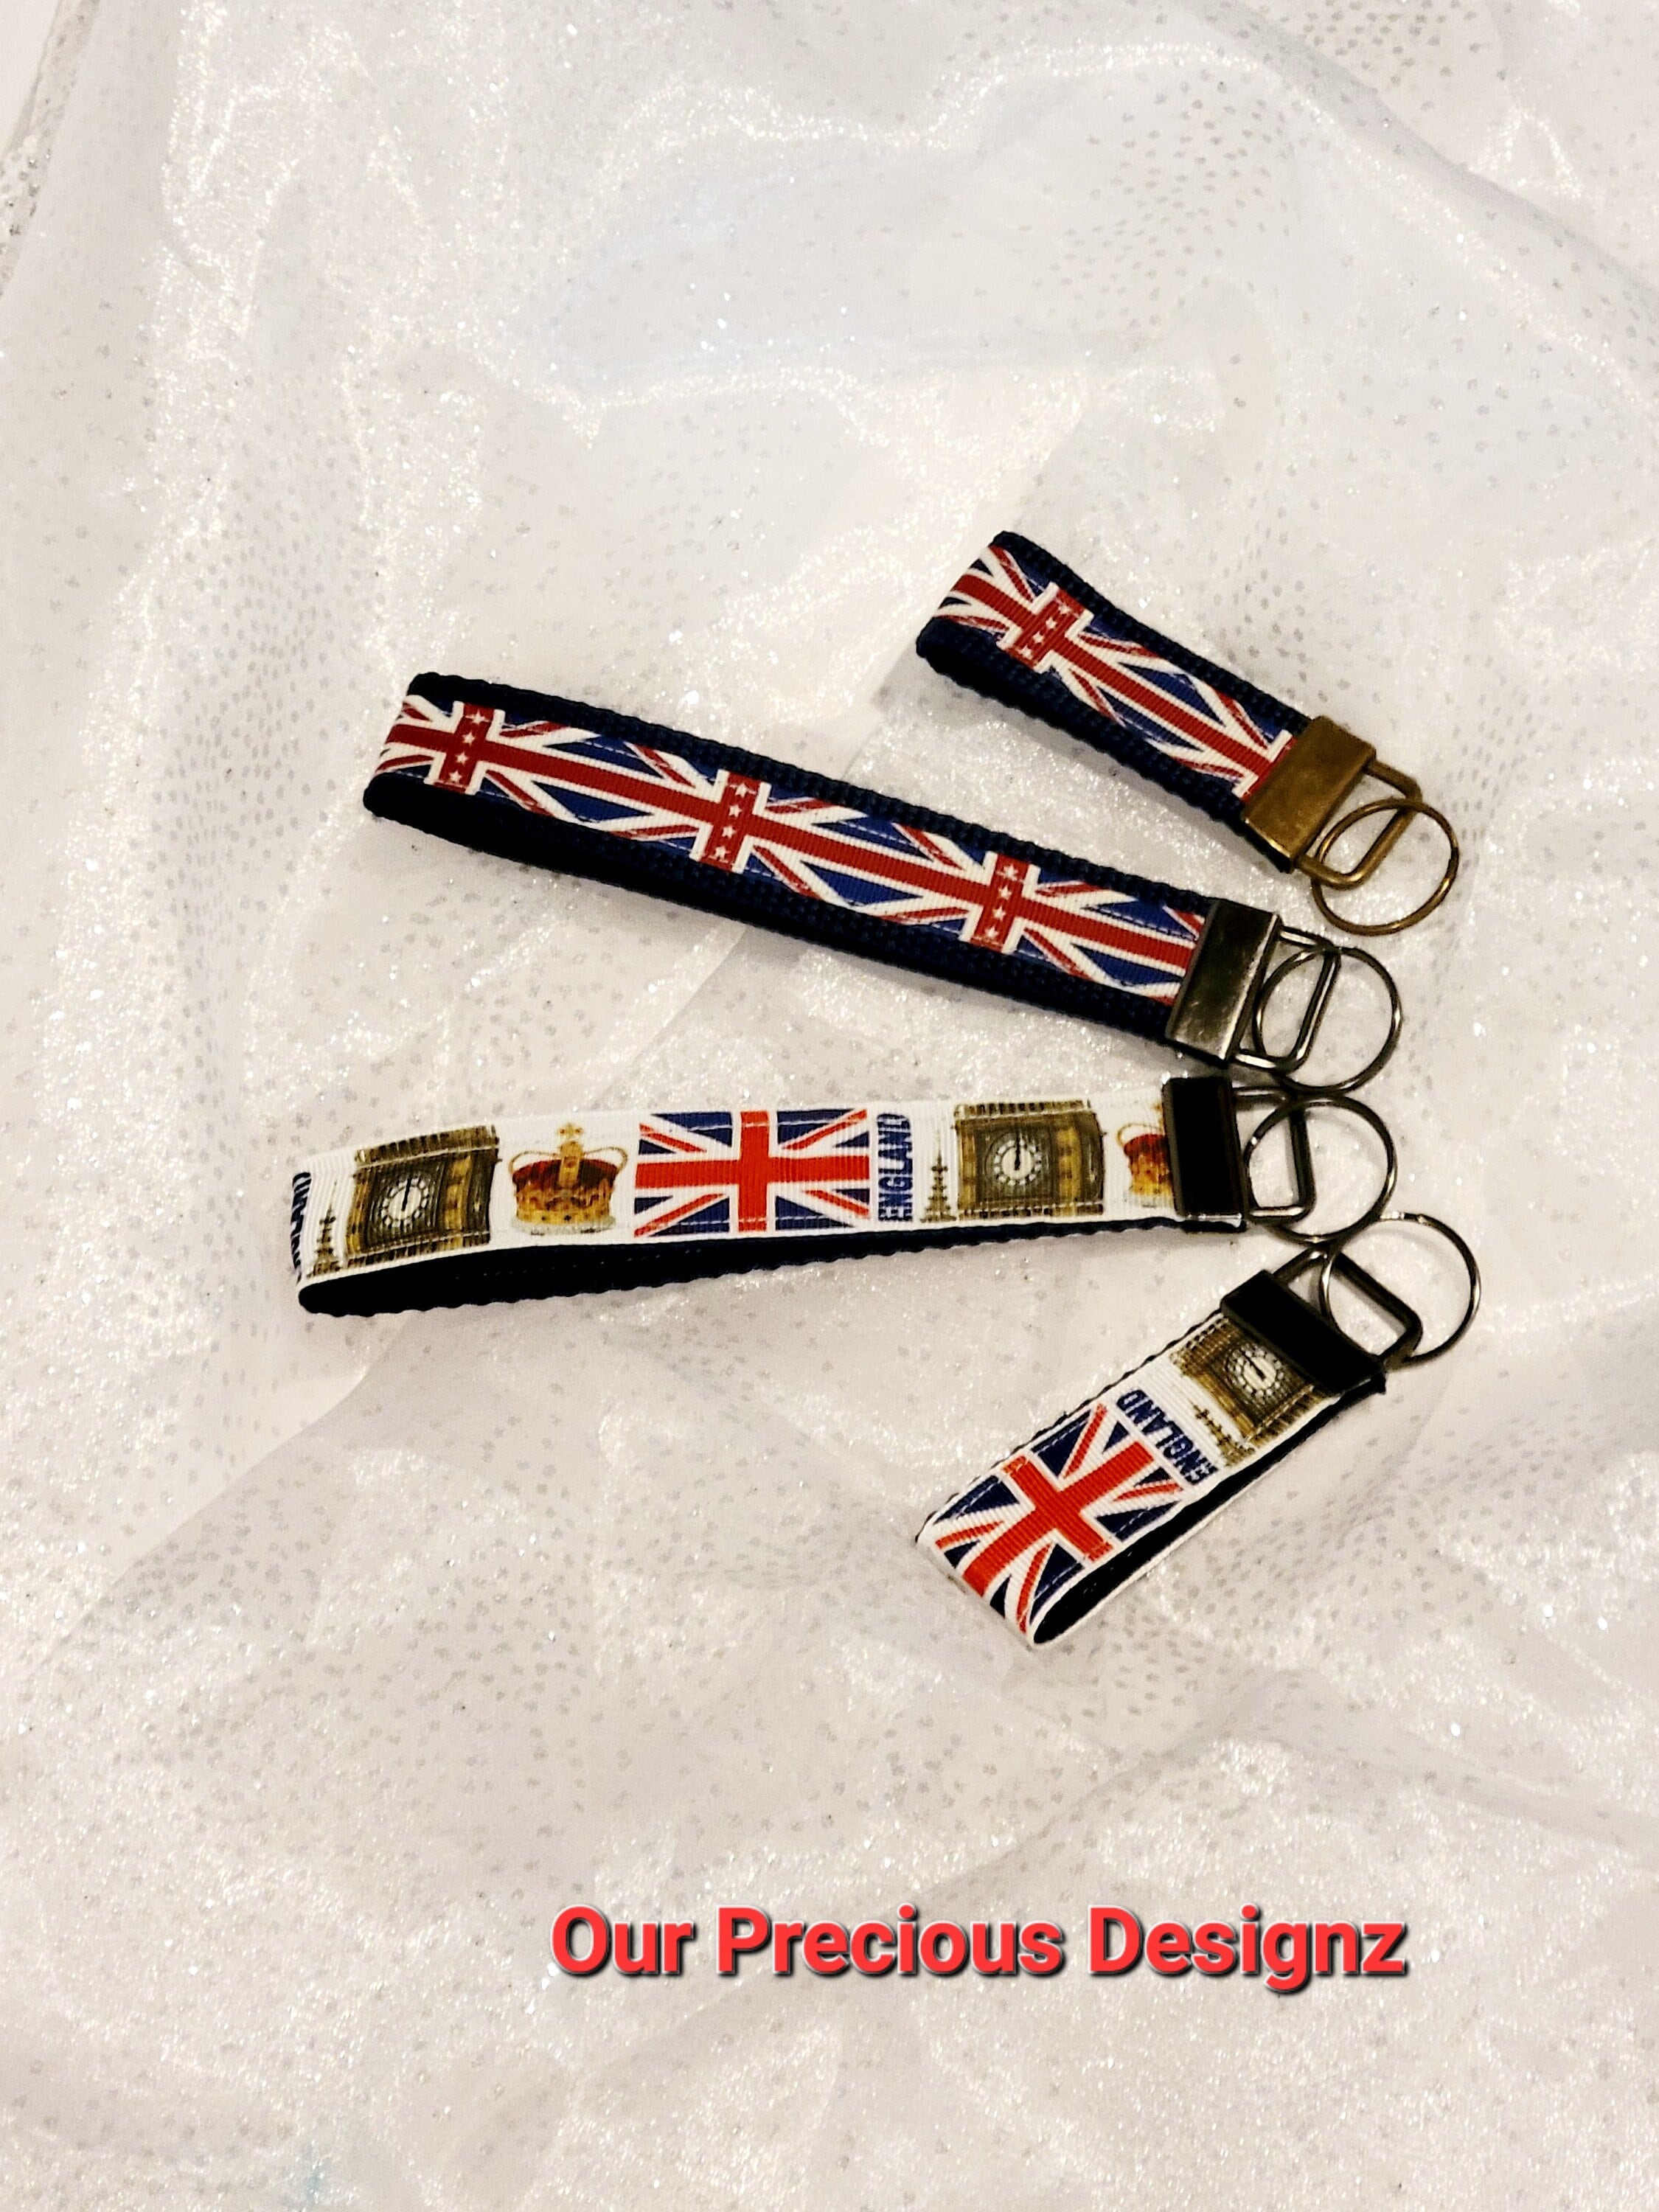 Thick Quality Key Fob 1/4 Leather Black , Brown , or Tan , Strong Key Ring  and Dog Hook / Bacsew UK 